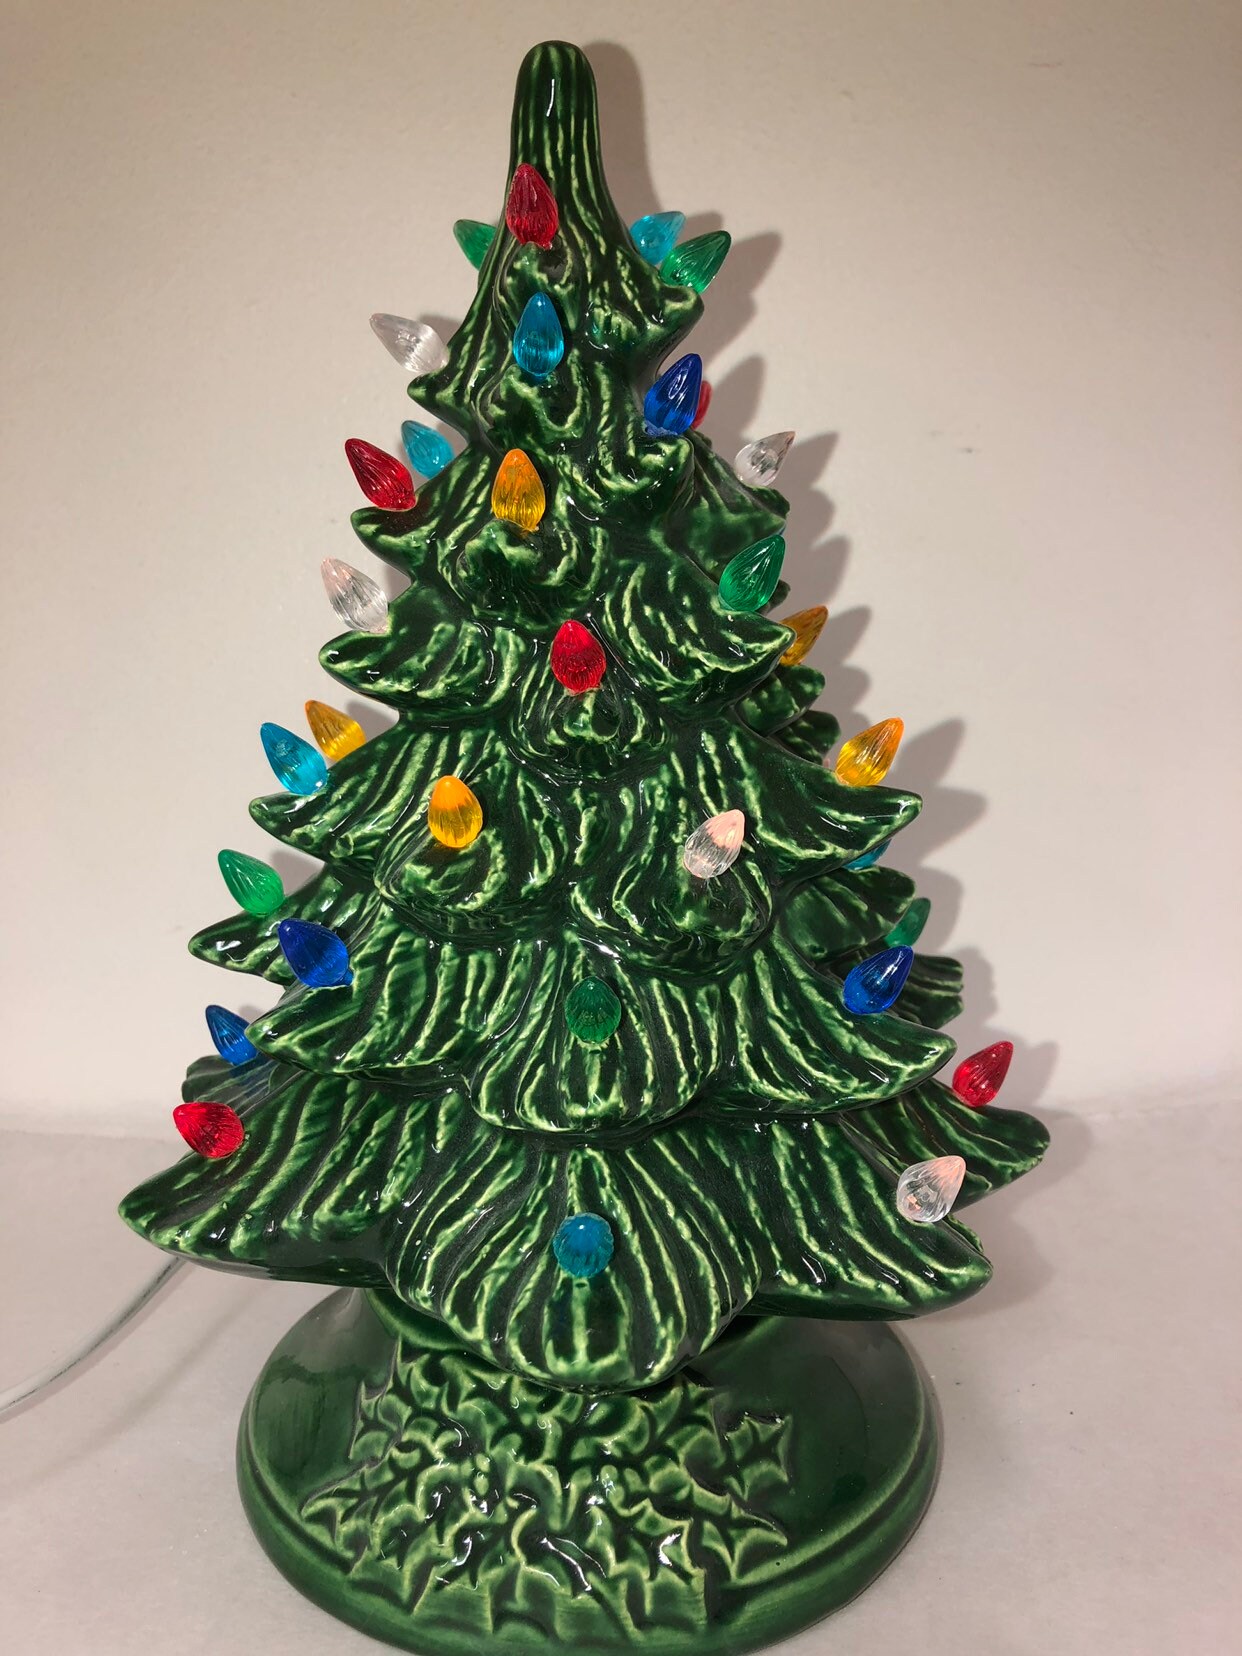  9 Ceramic Christmas Trees That Light Up - Vintage Ceramic  Tabletop Christmas Tree, Porcelain Magical Christmas Tree with 44  Multicolored Lights for Christmas Table Decorations : Home & Kitchen